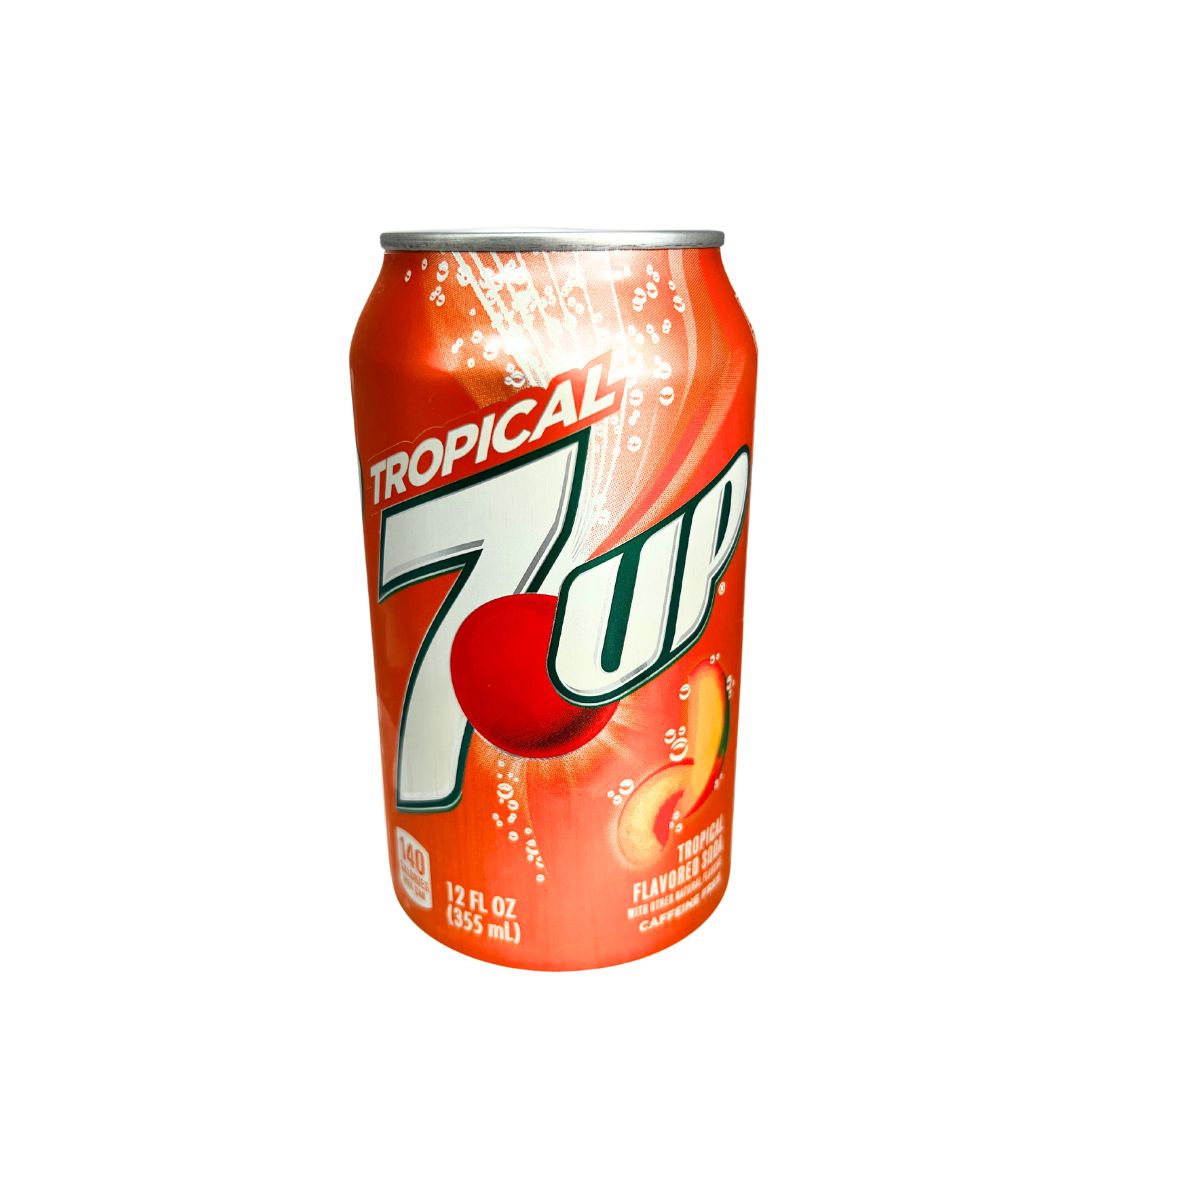 7UP - Tropical Flavor